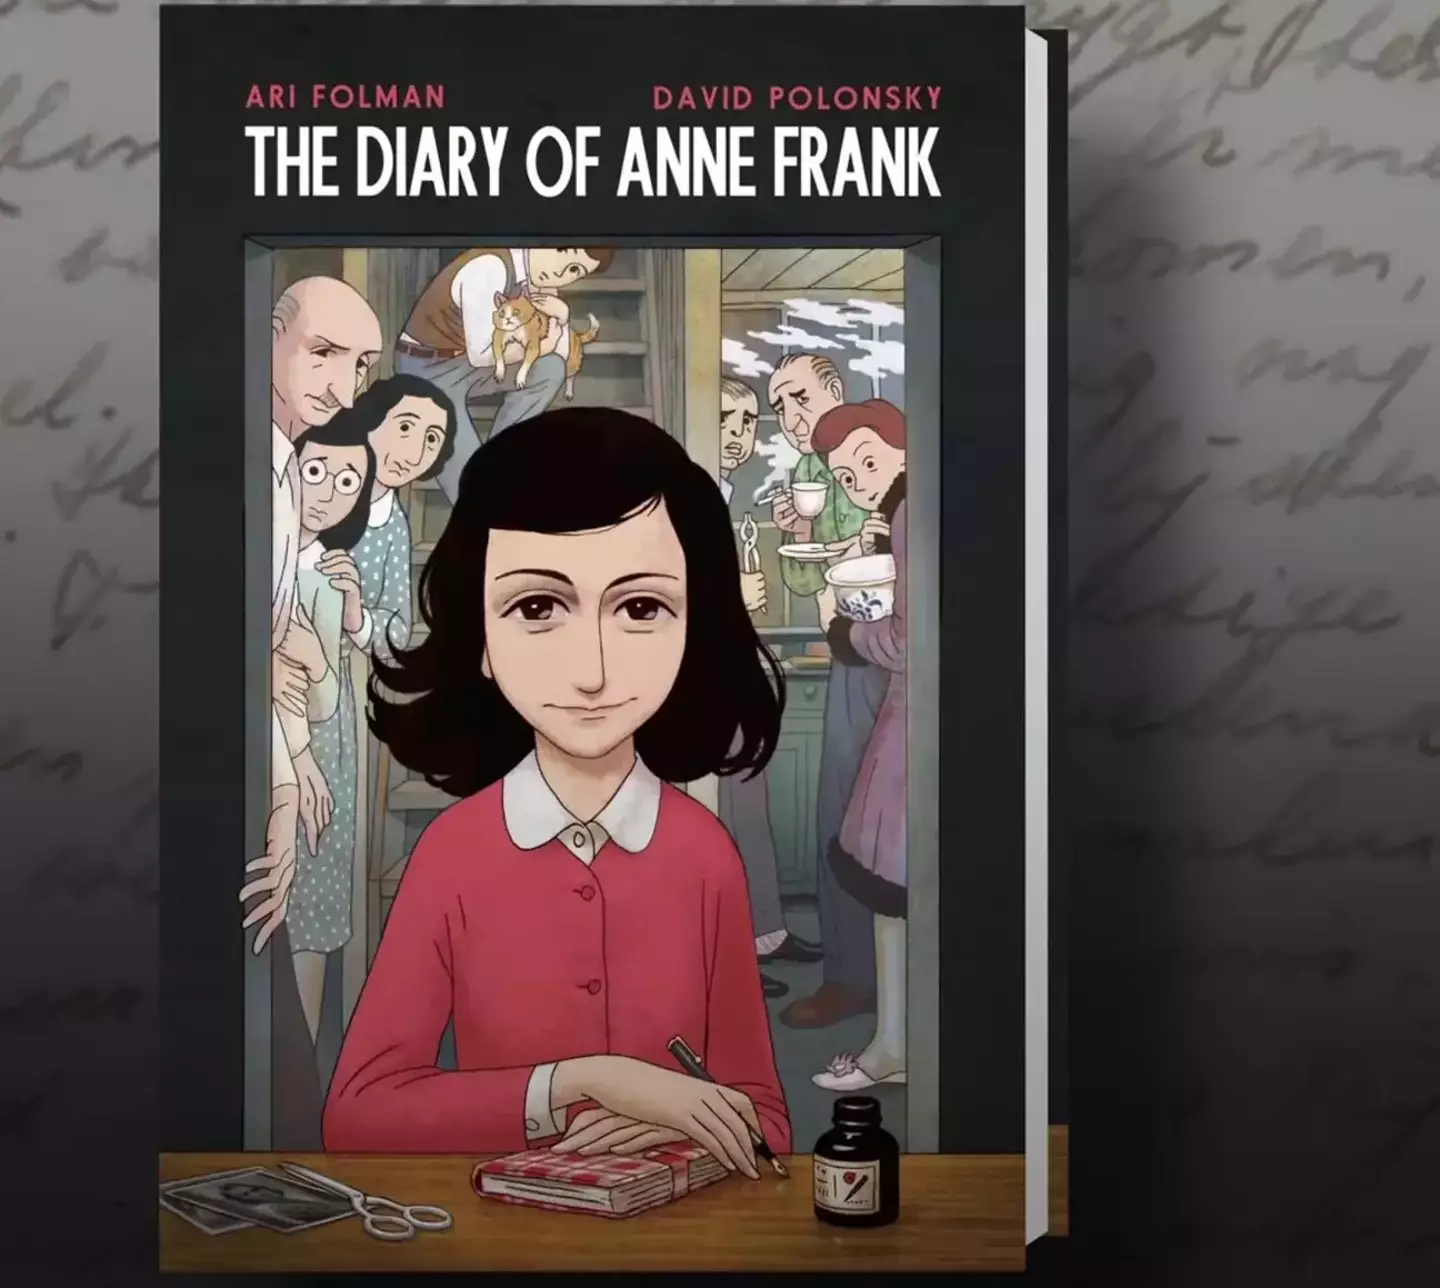 A Texan teacher has reportedly been dismissed after reading a version of Anne Frank's Diary.